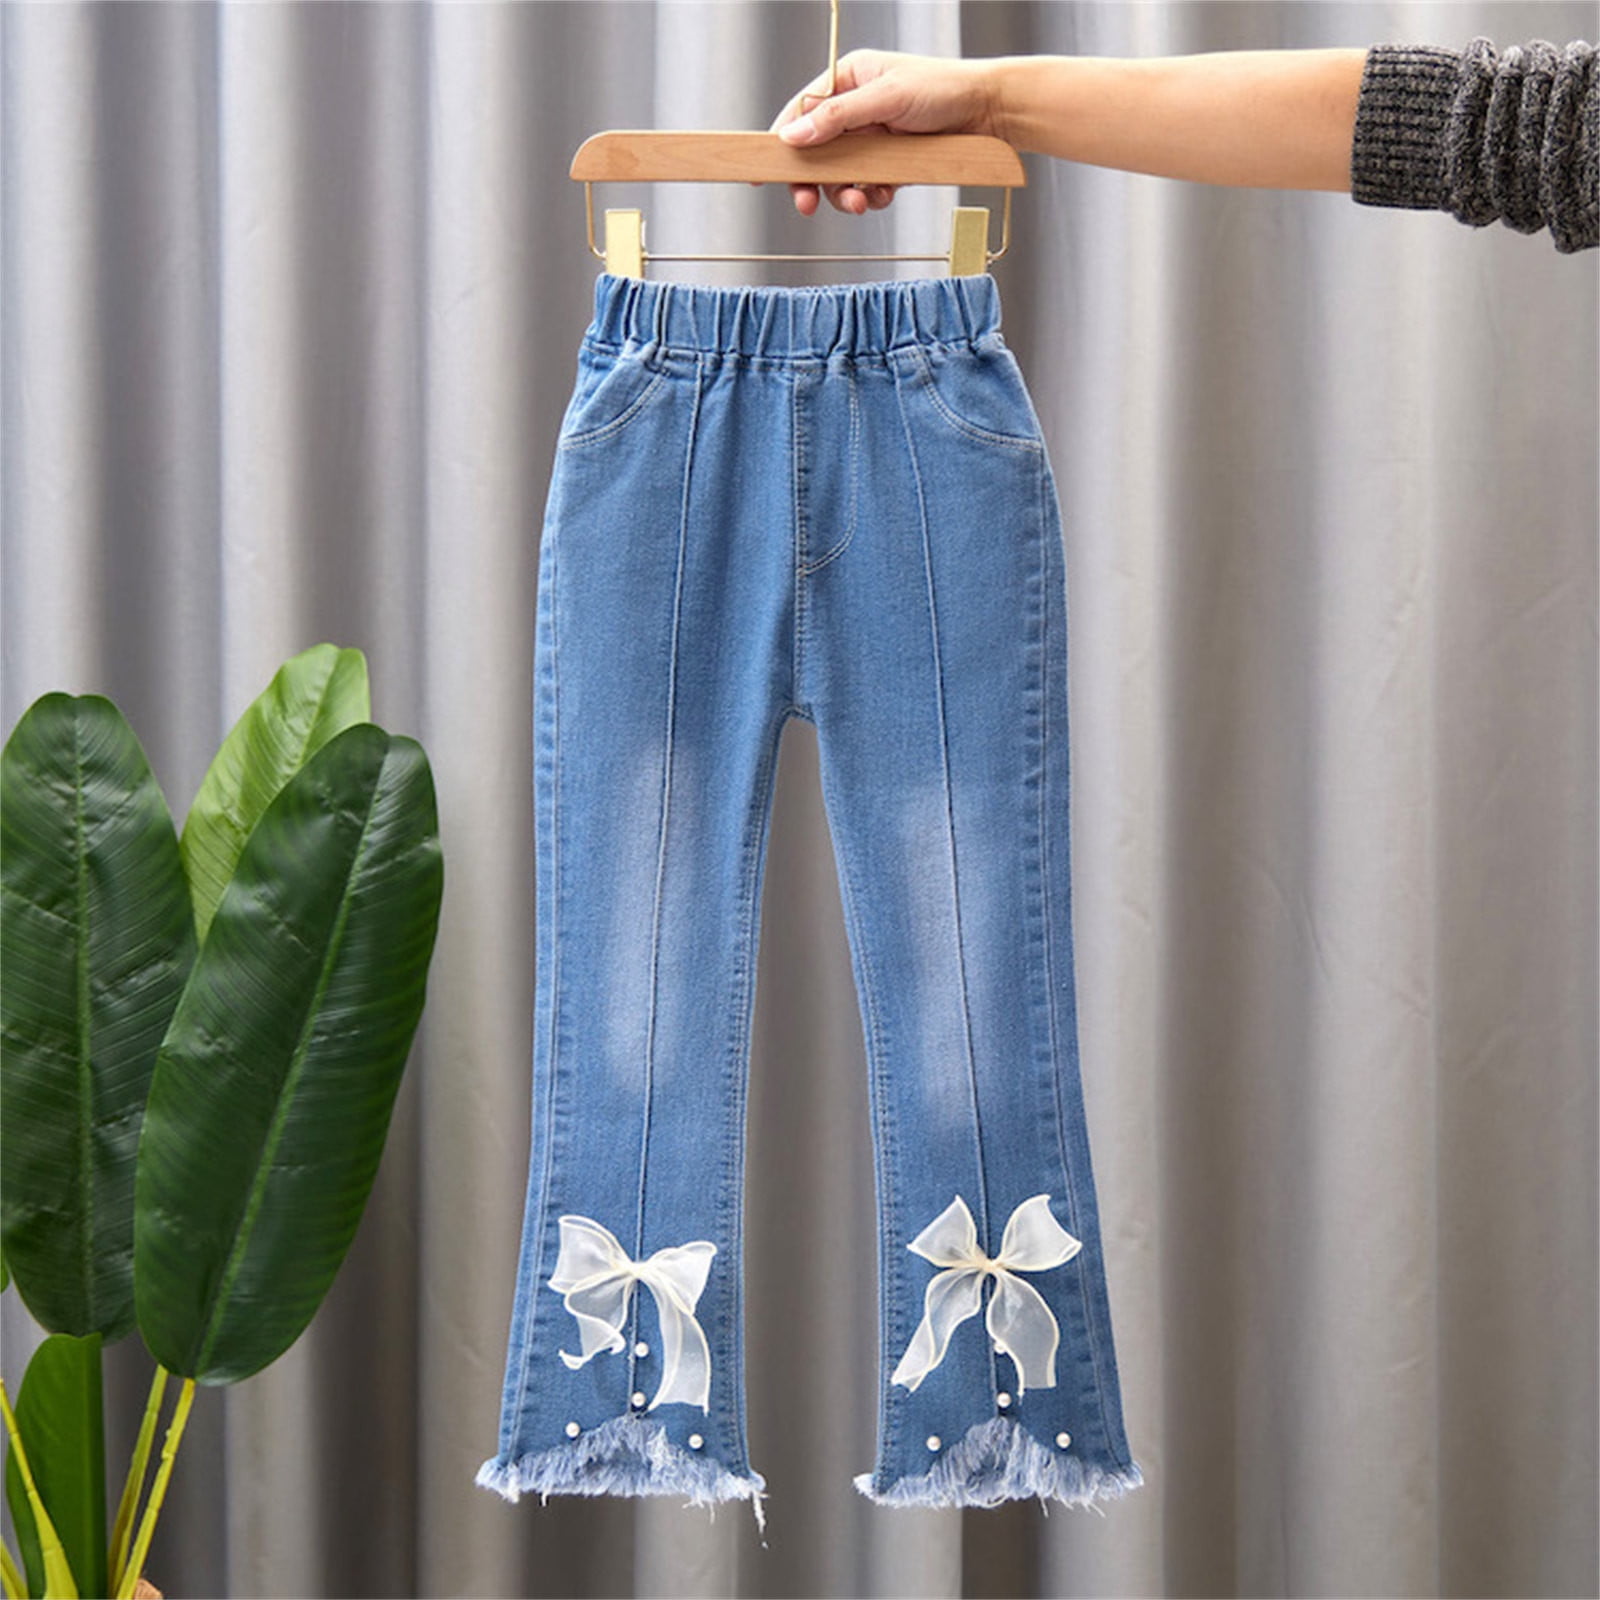 new arrival 5 pocket denim joggers jeans for girls and women . –  g2gfashion.com